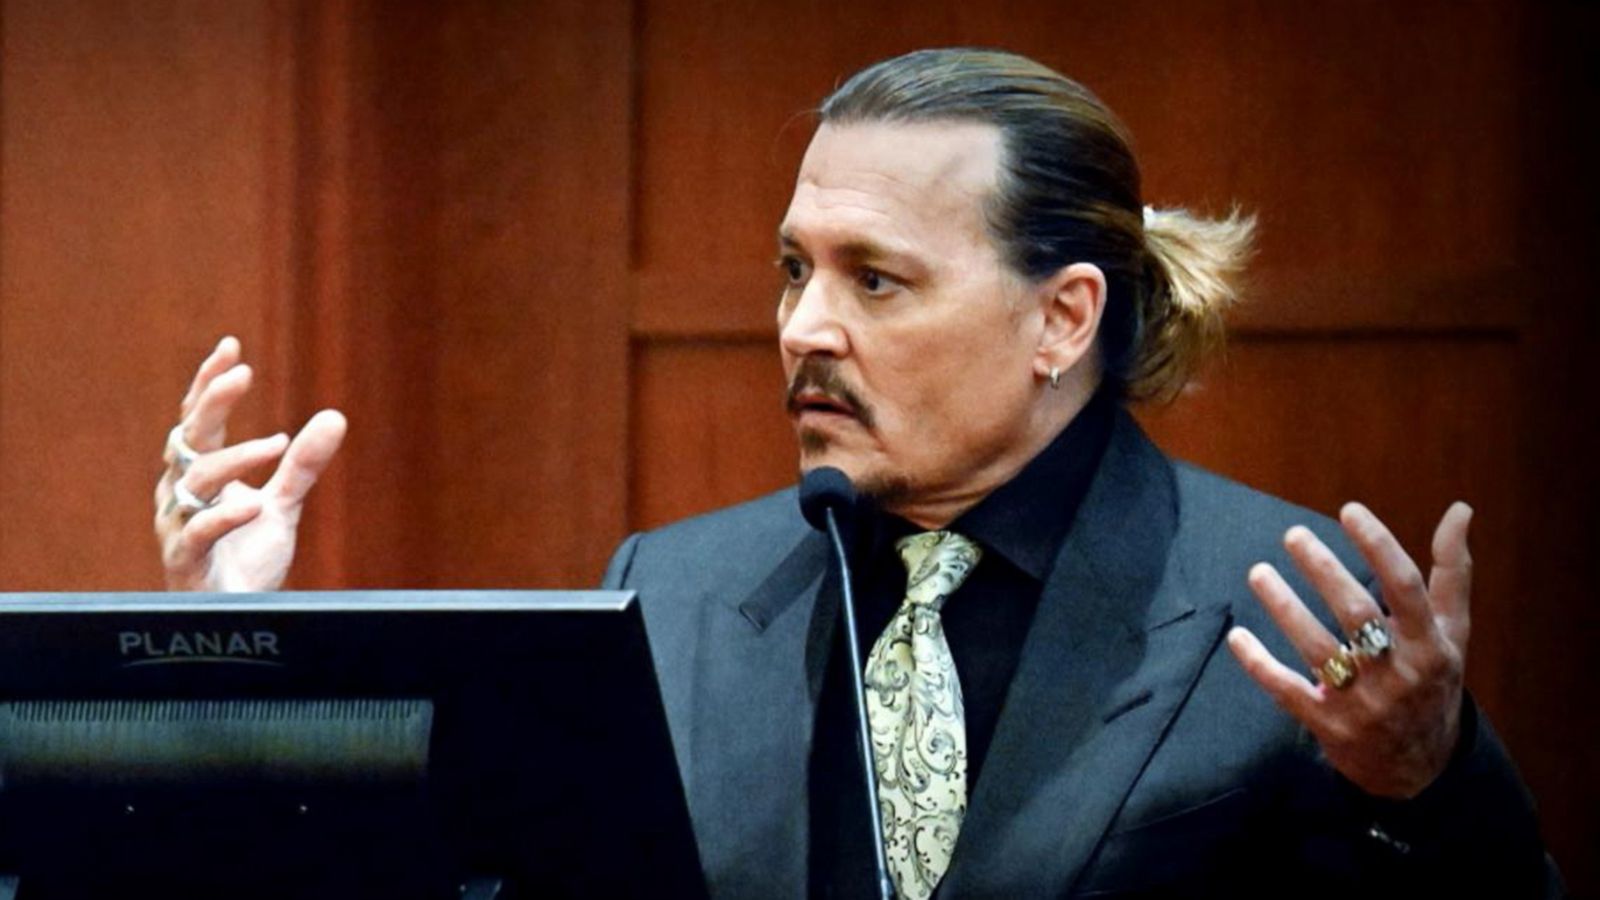 ABC News Live: Actor Johnny Depp set to testify against ex-wife Amber ...